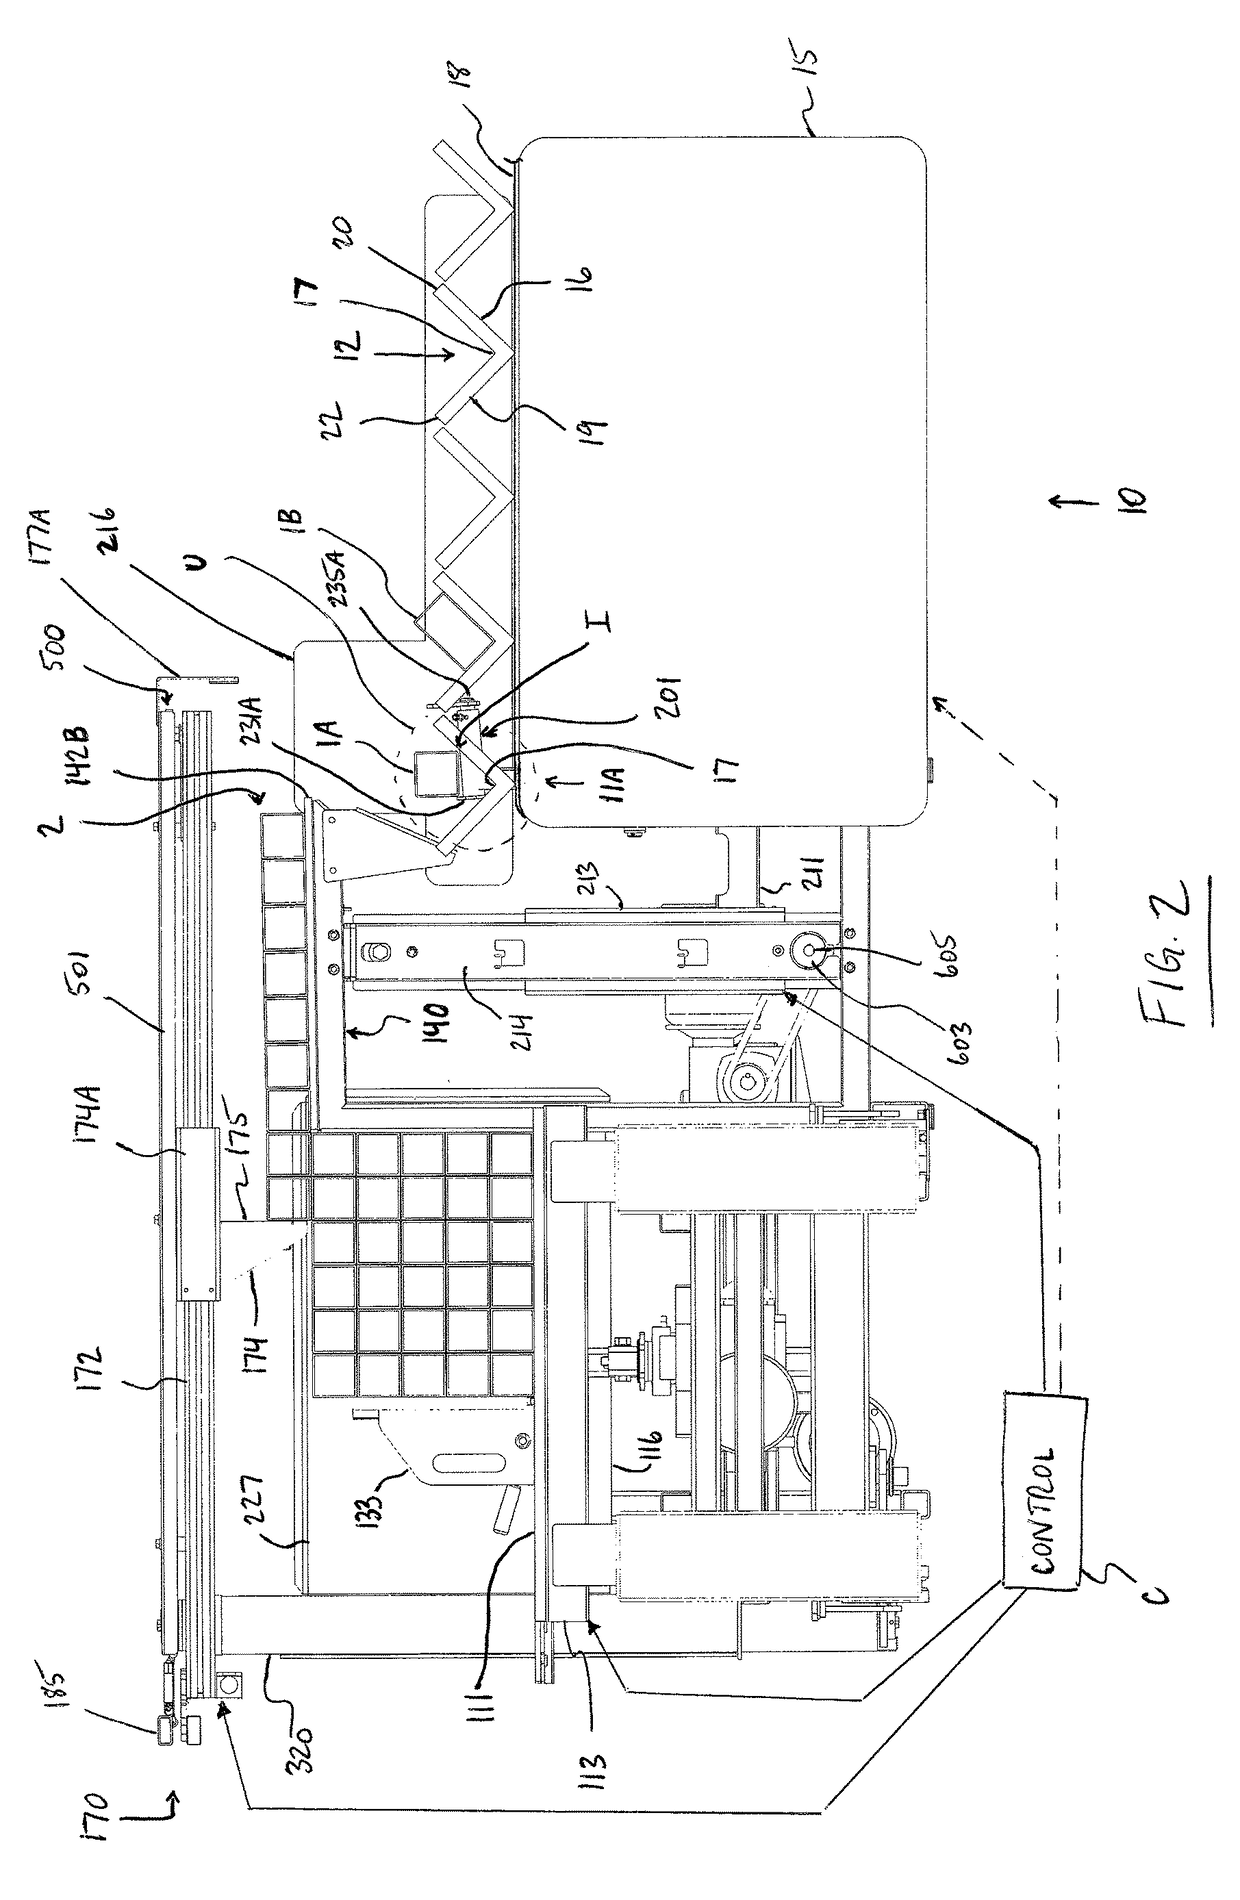 System for loading elongated members such as tubes onto a conveyor for later processing